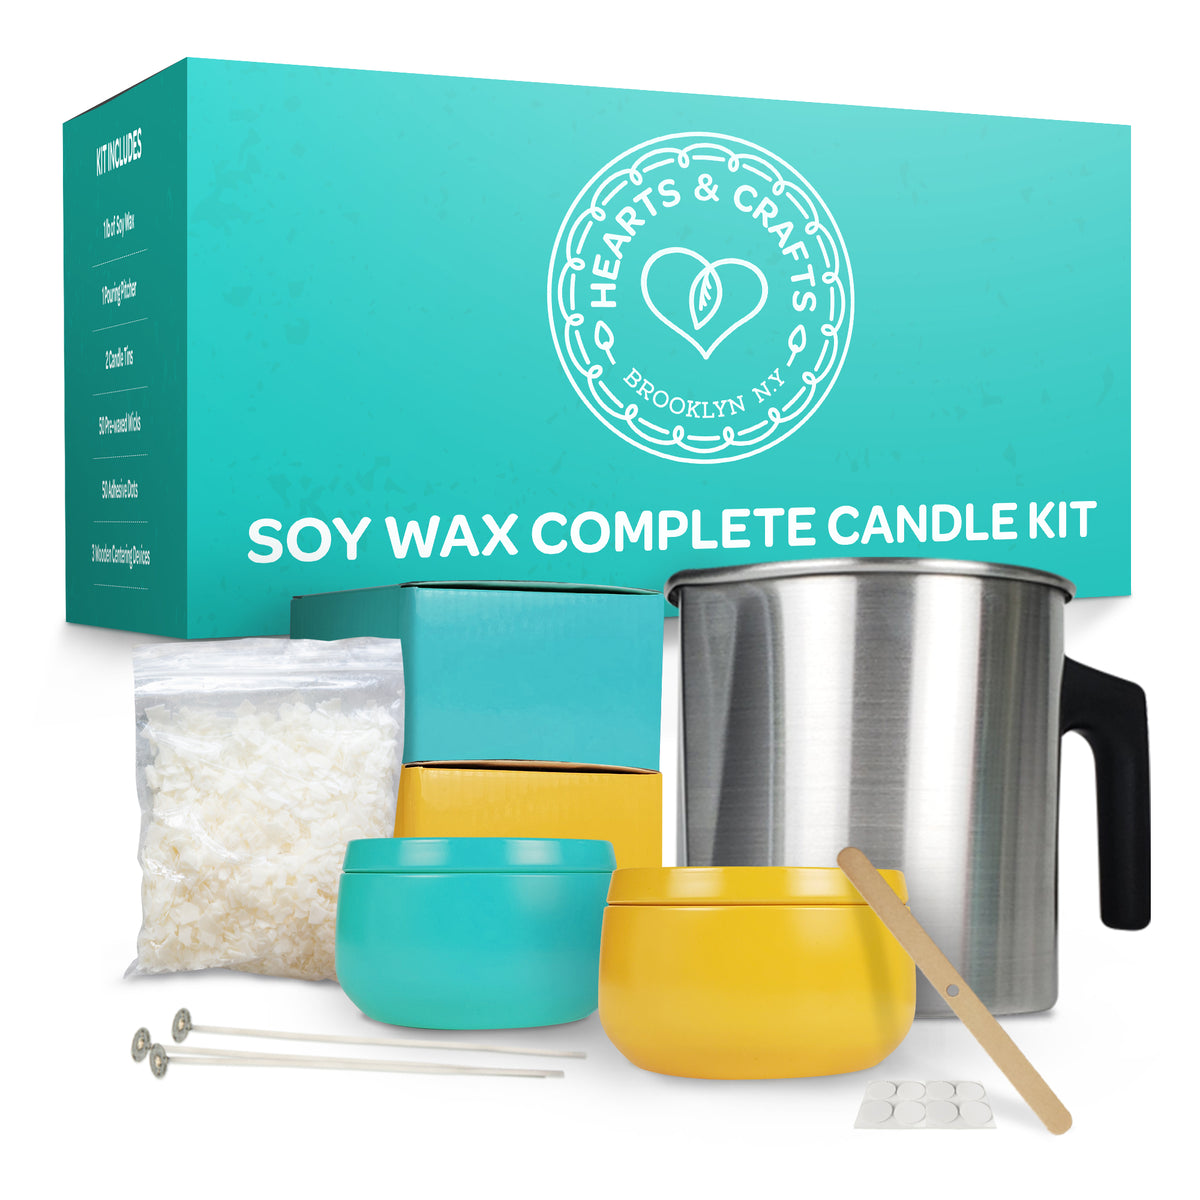 SOY WAX KIT – 2LB (CASE OF 18 UNITS)– Hearts & Crafts